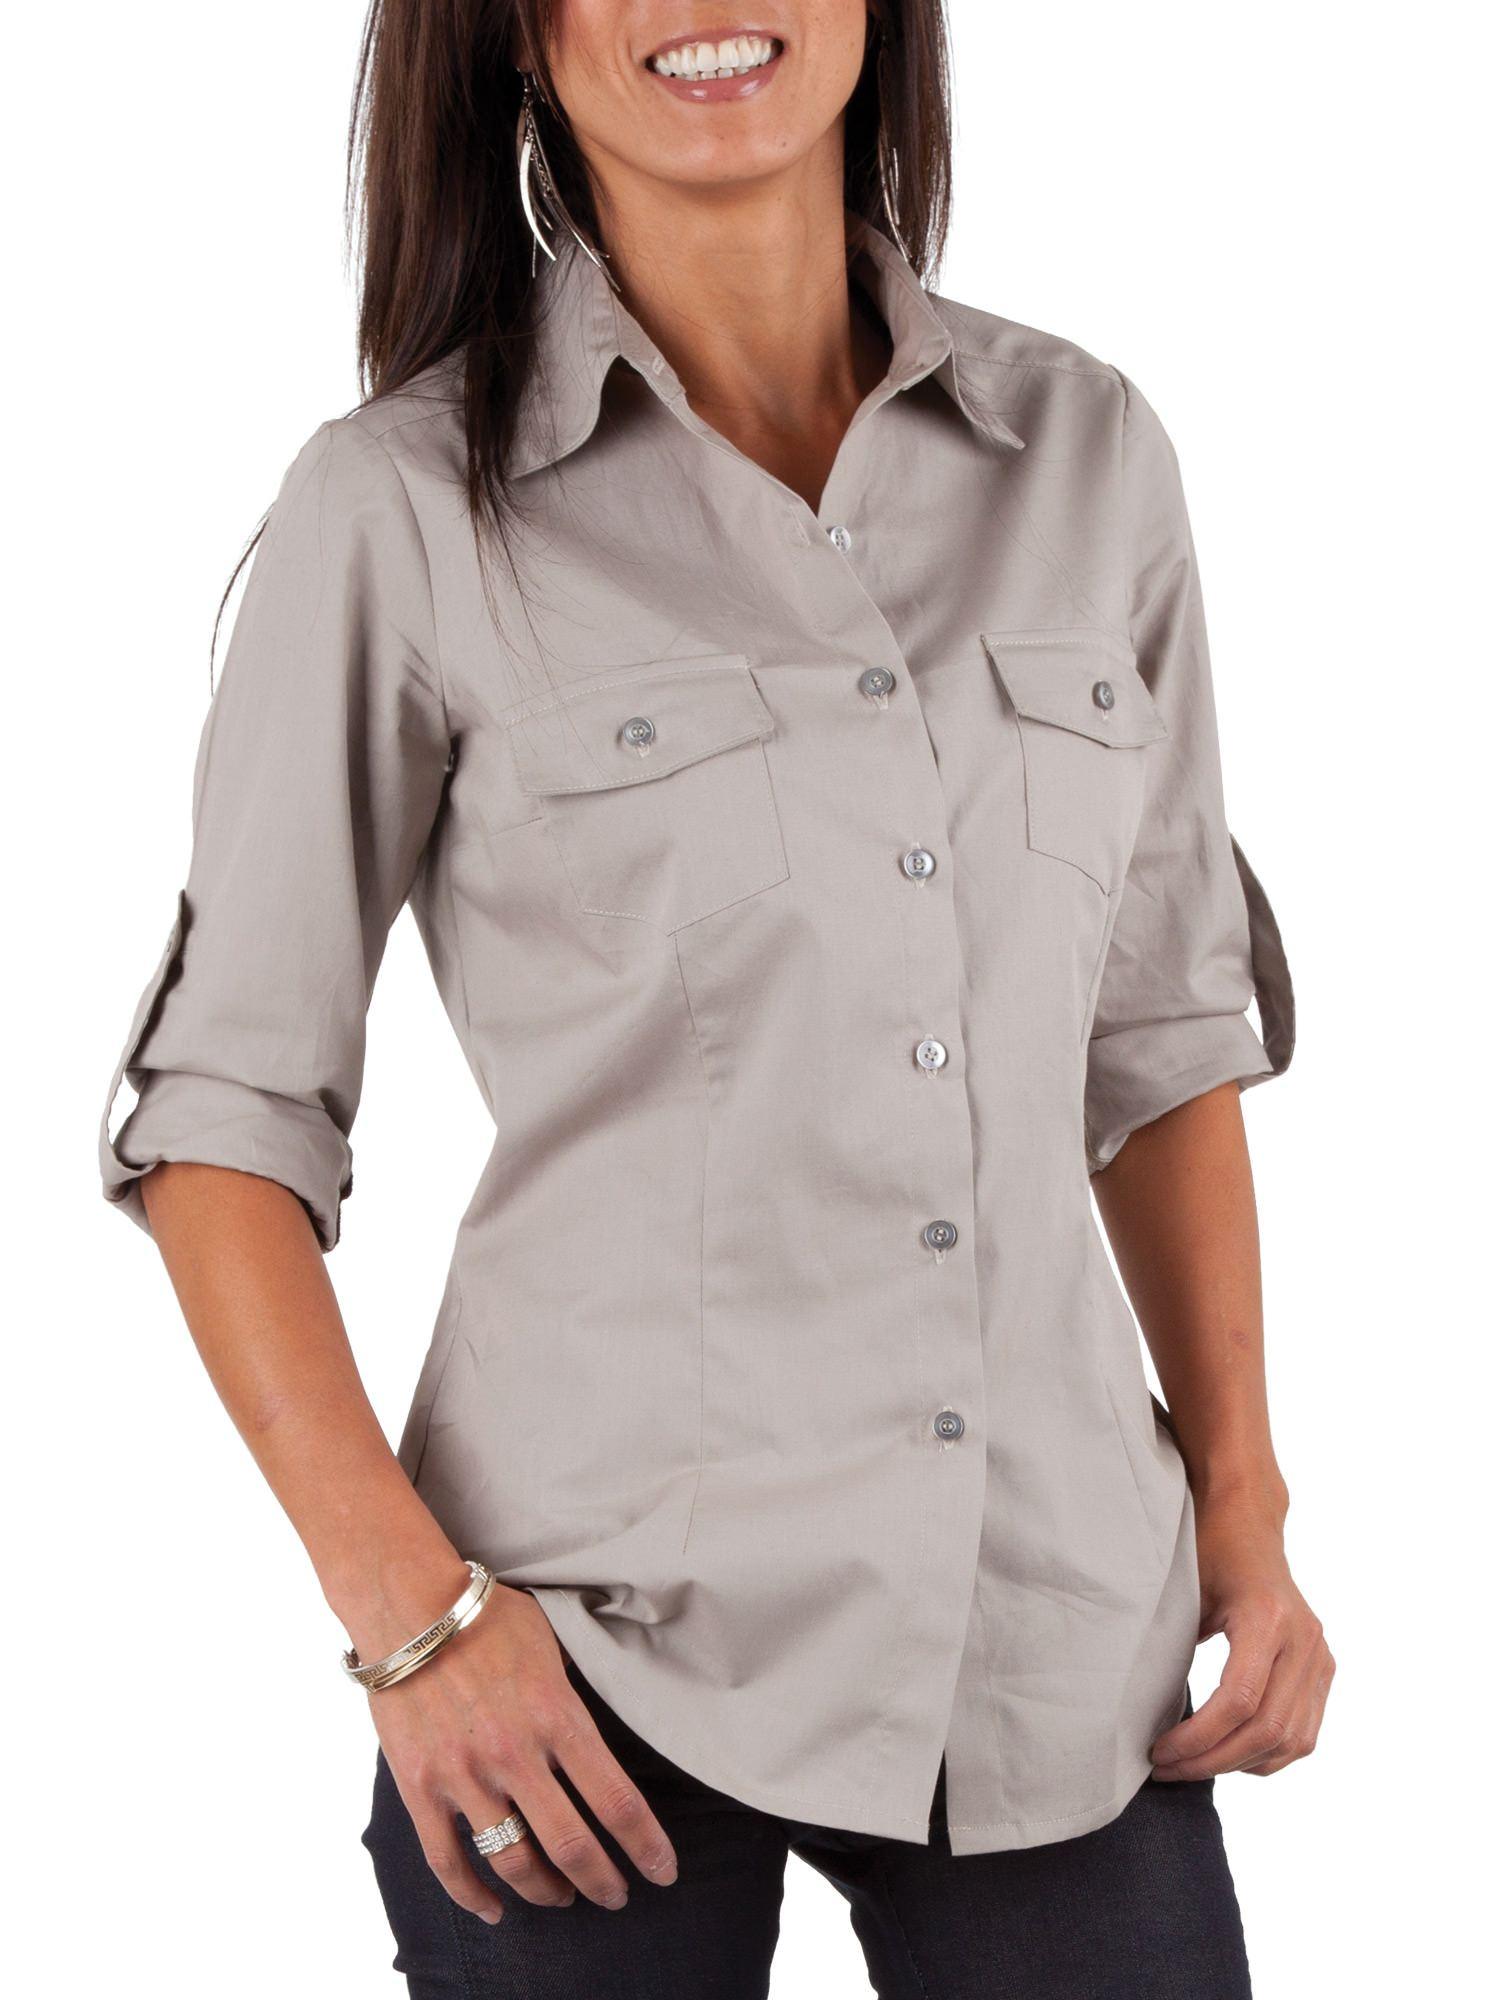 Jalie 3130 - Women's Shirt with Pockets and Sleeve Tabs